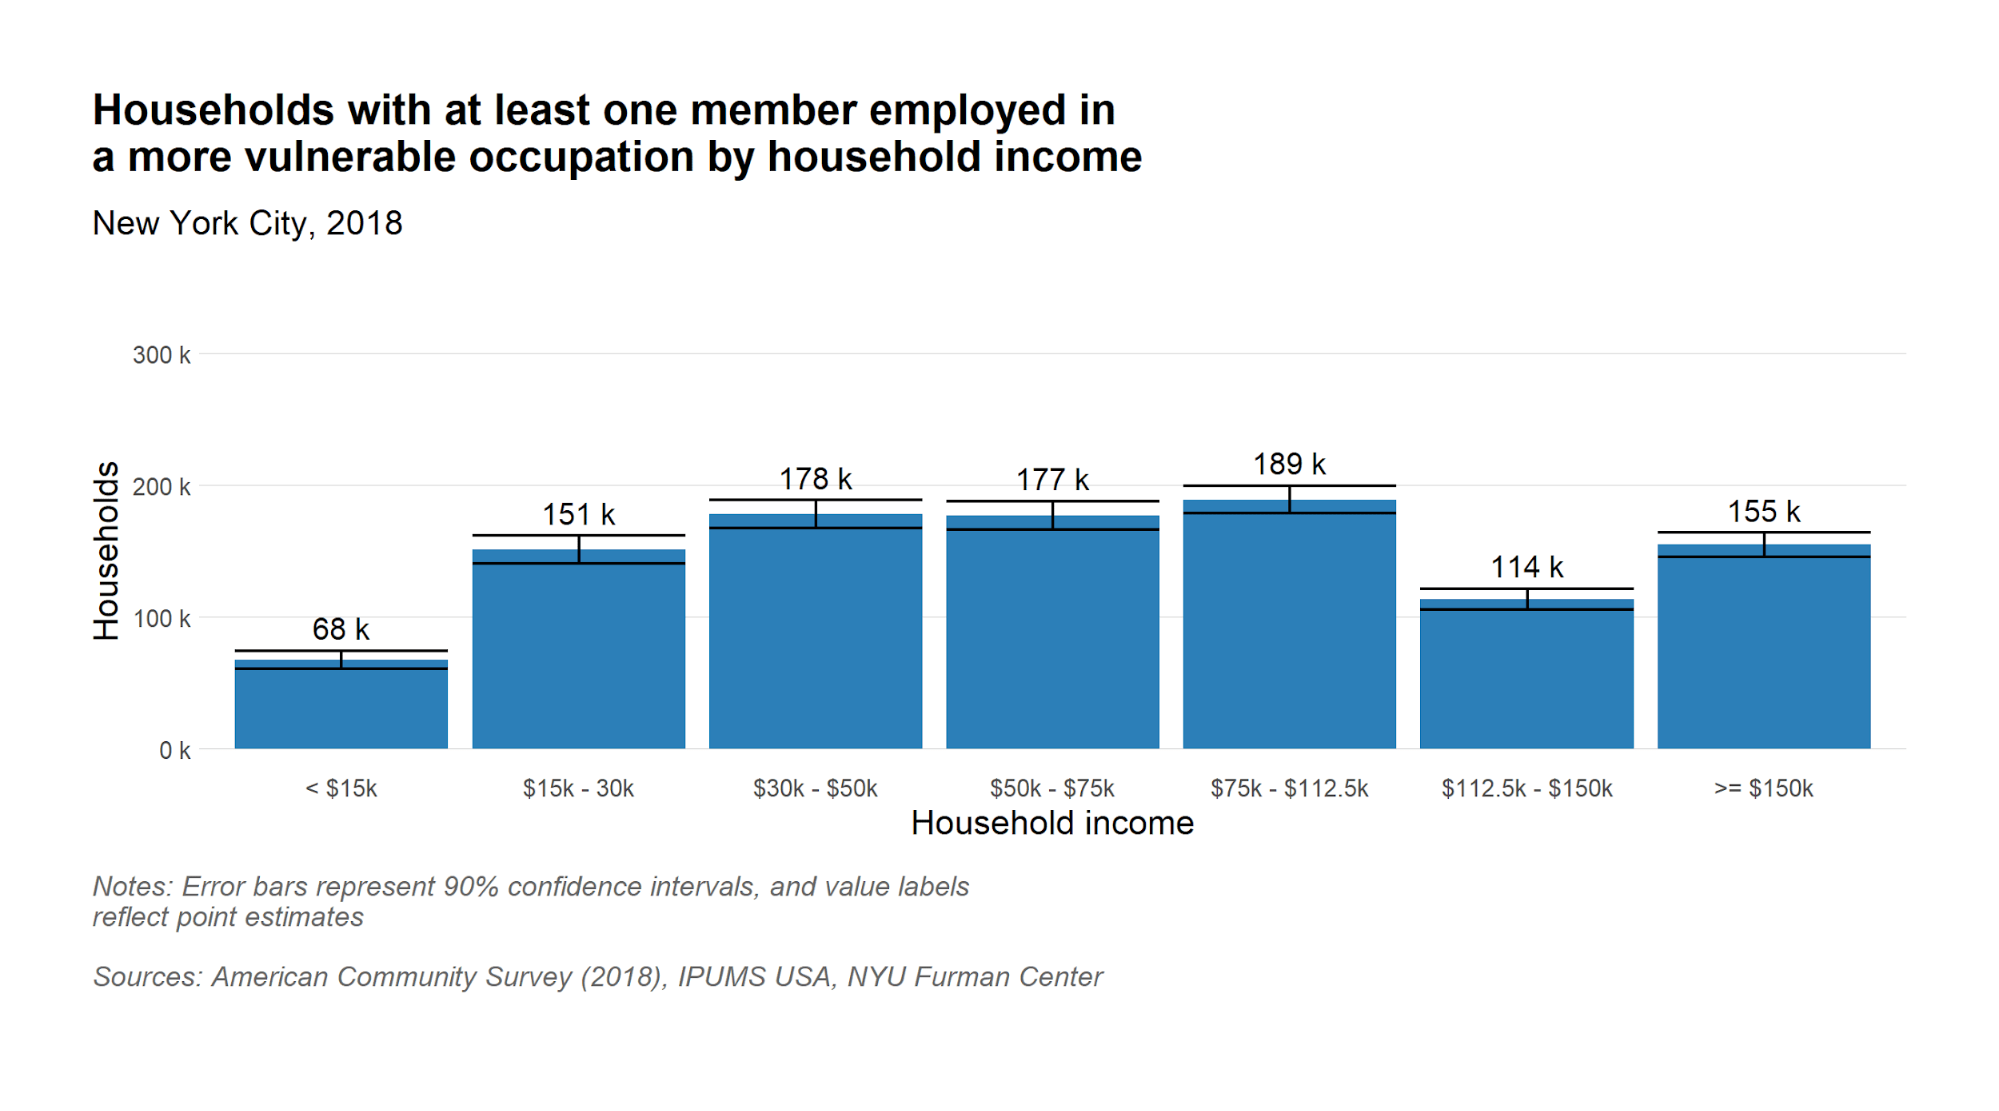 Number of households with at least one member in vulnerable occupation by household income